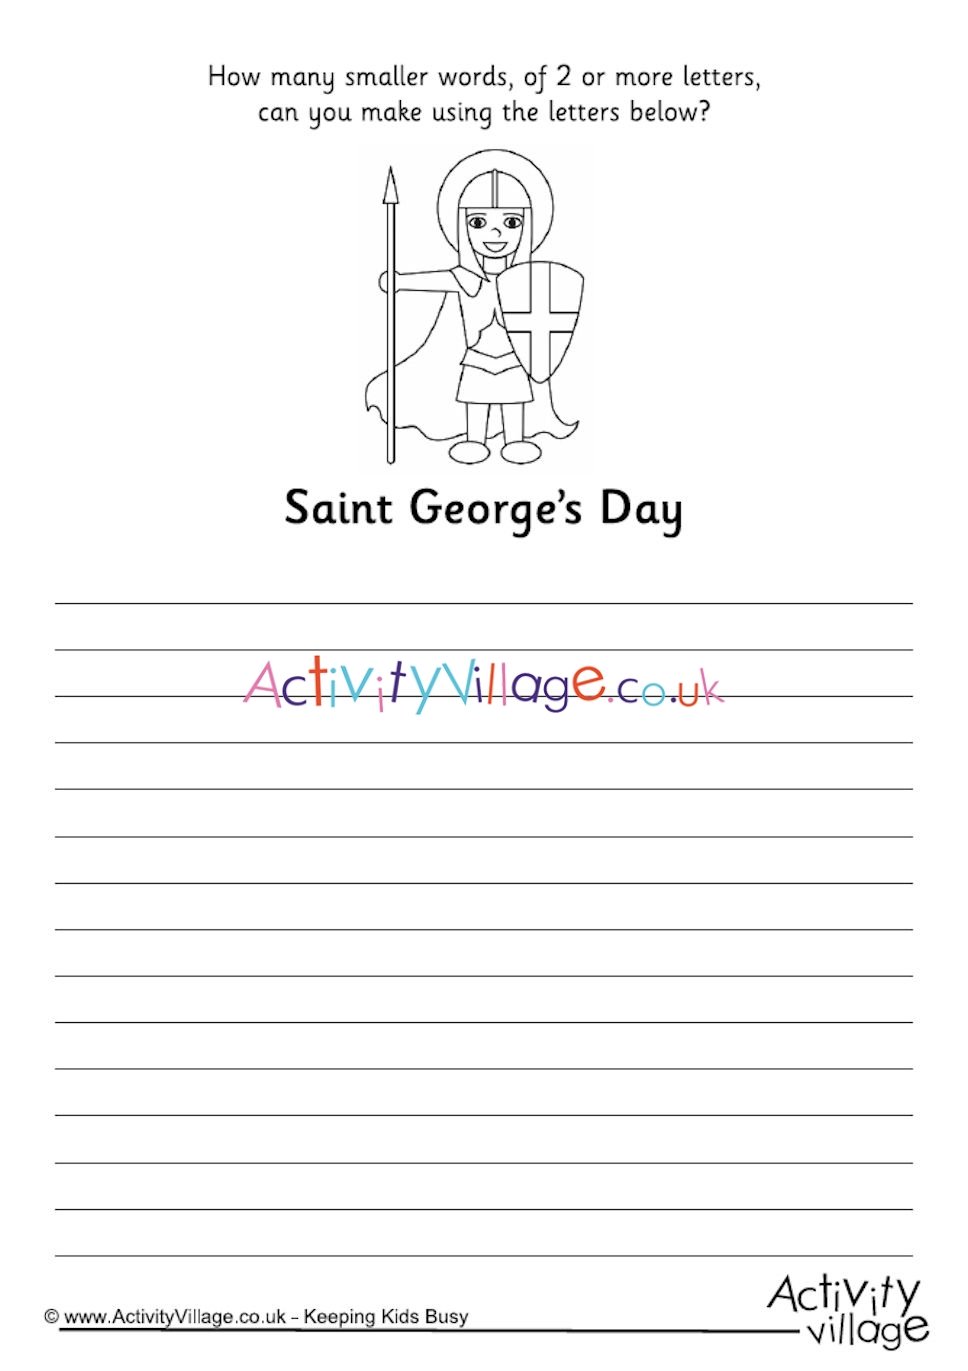 St George's Day how many words